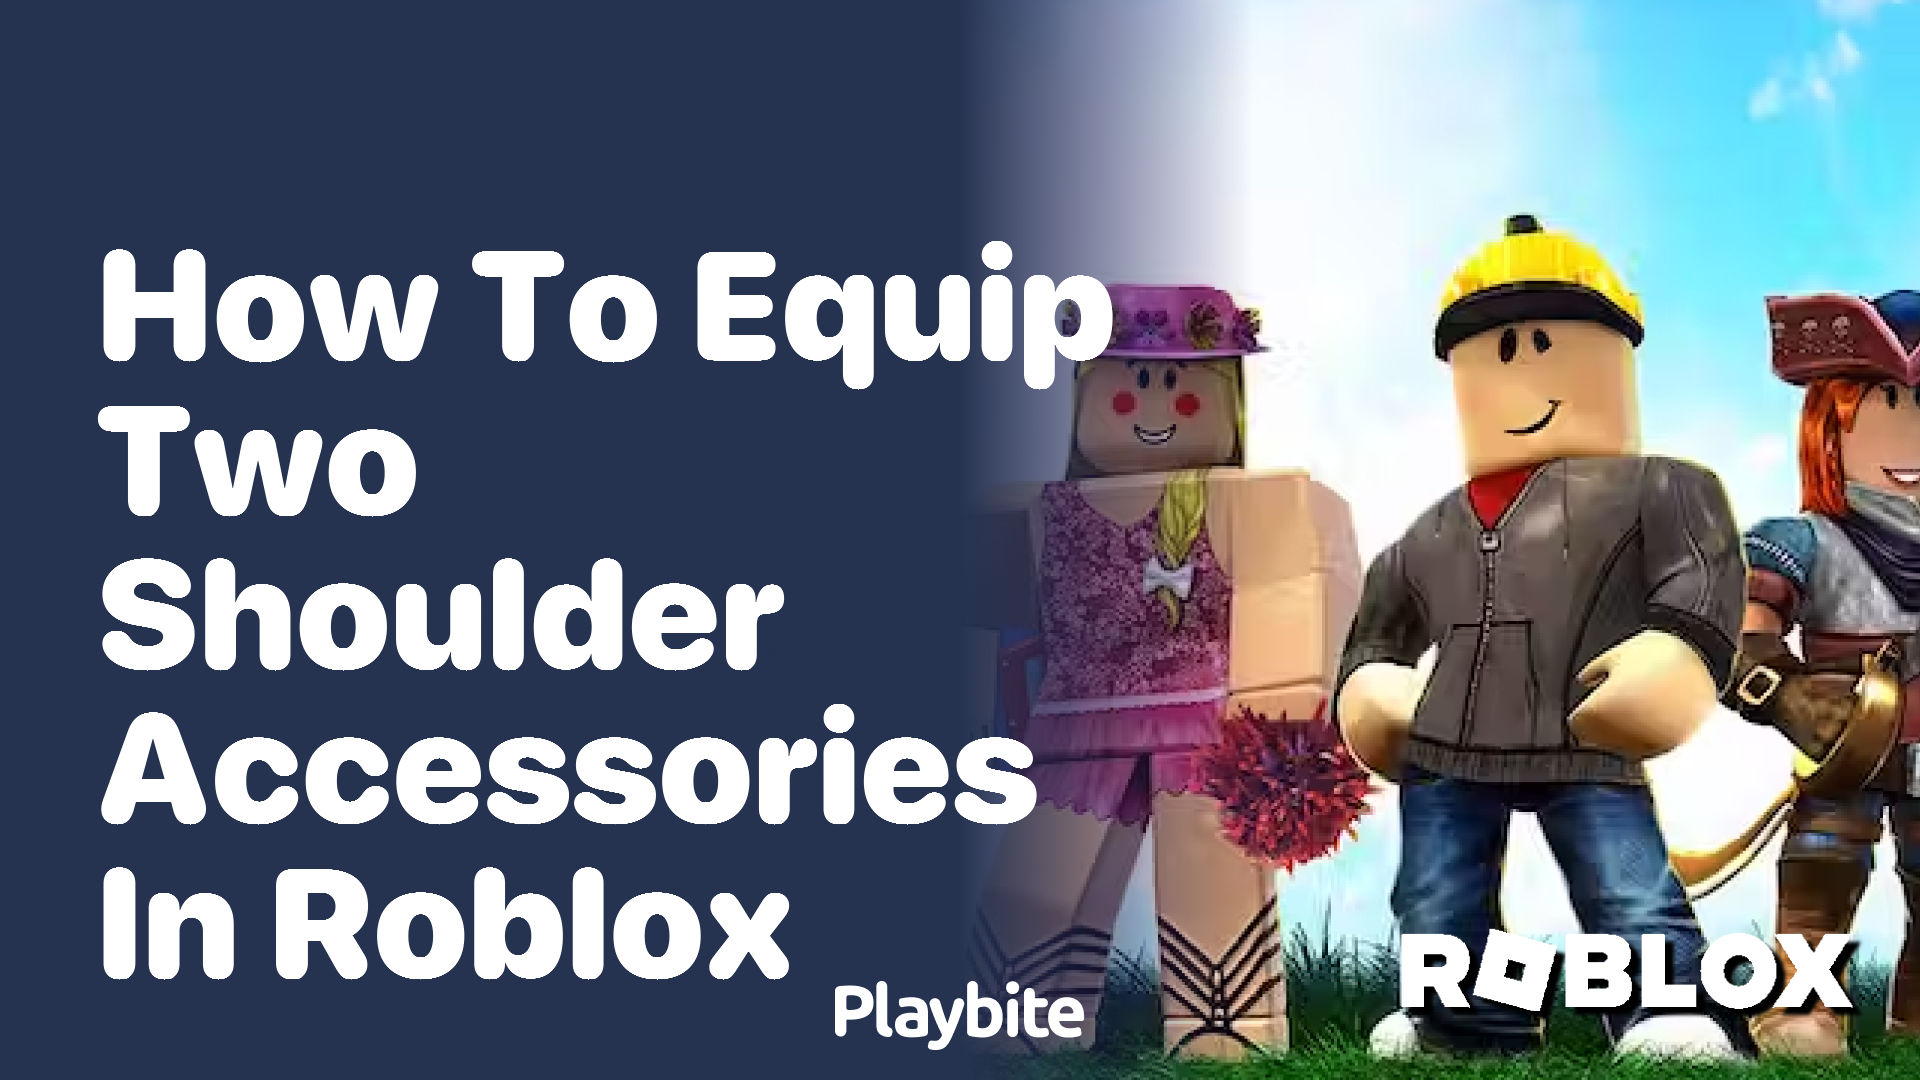 How to Equip Two Shoulder Accessories in Roblox